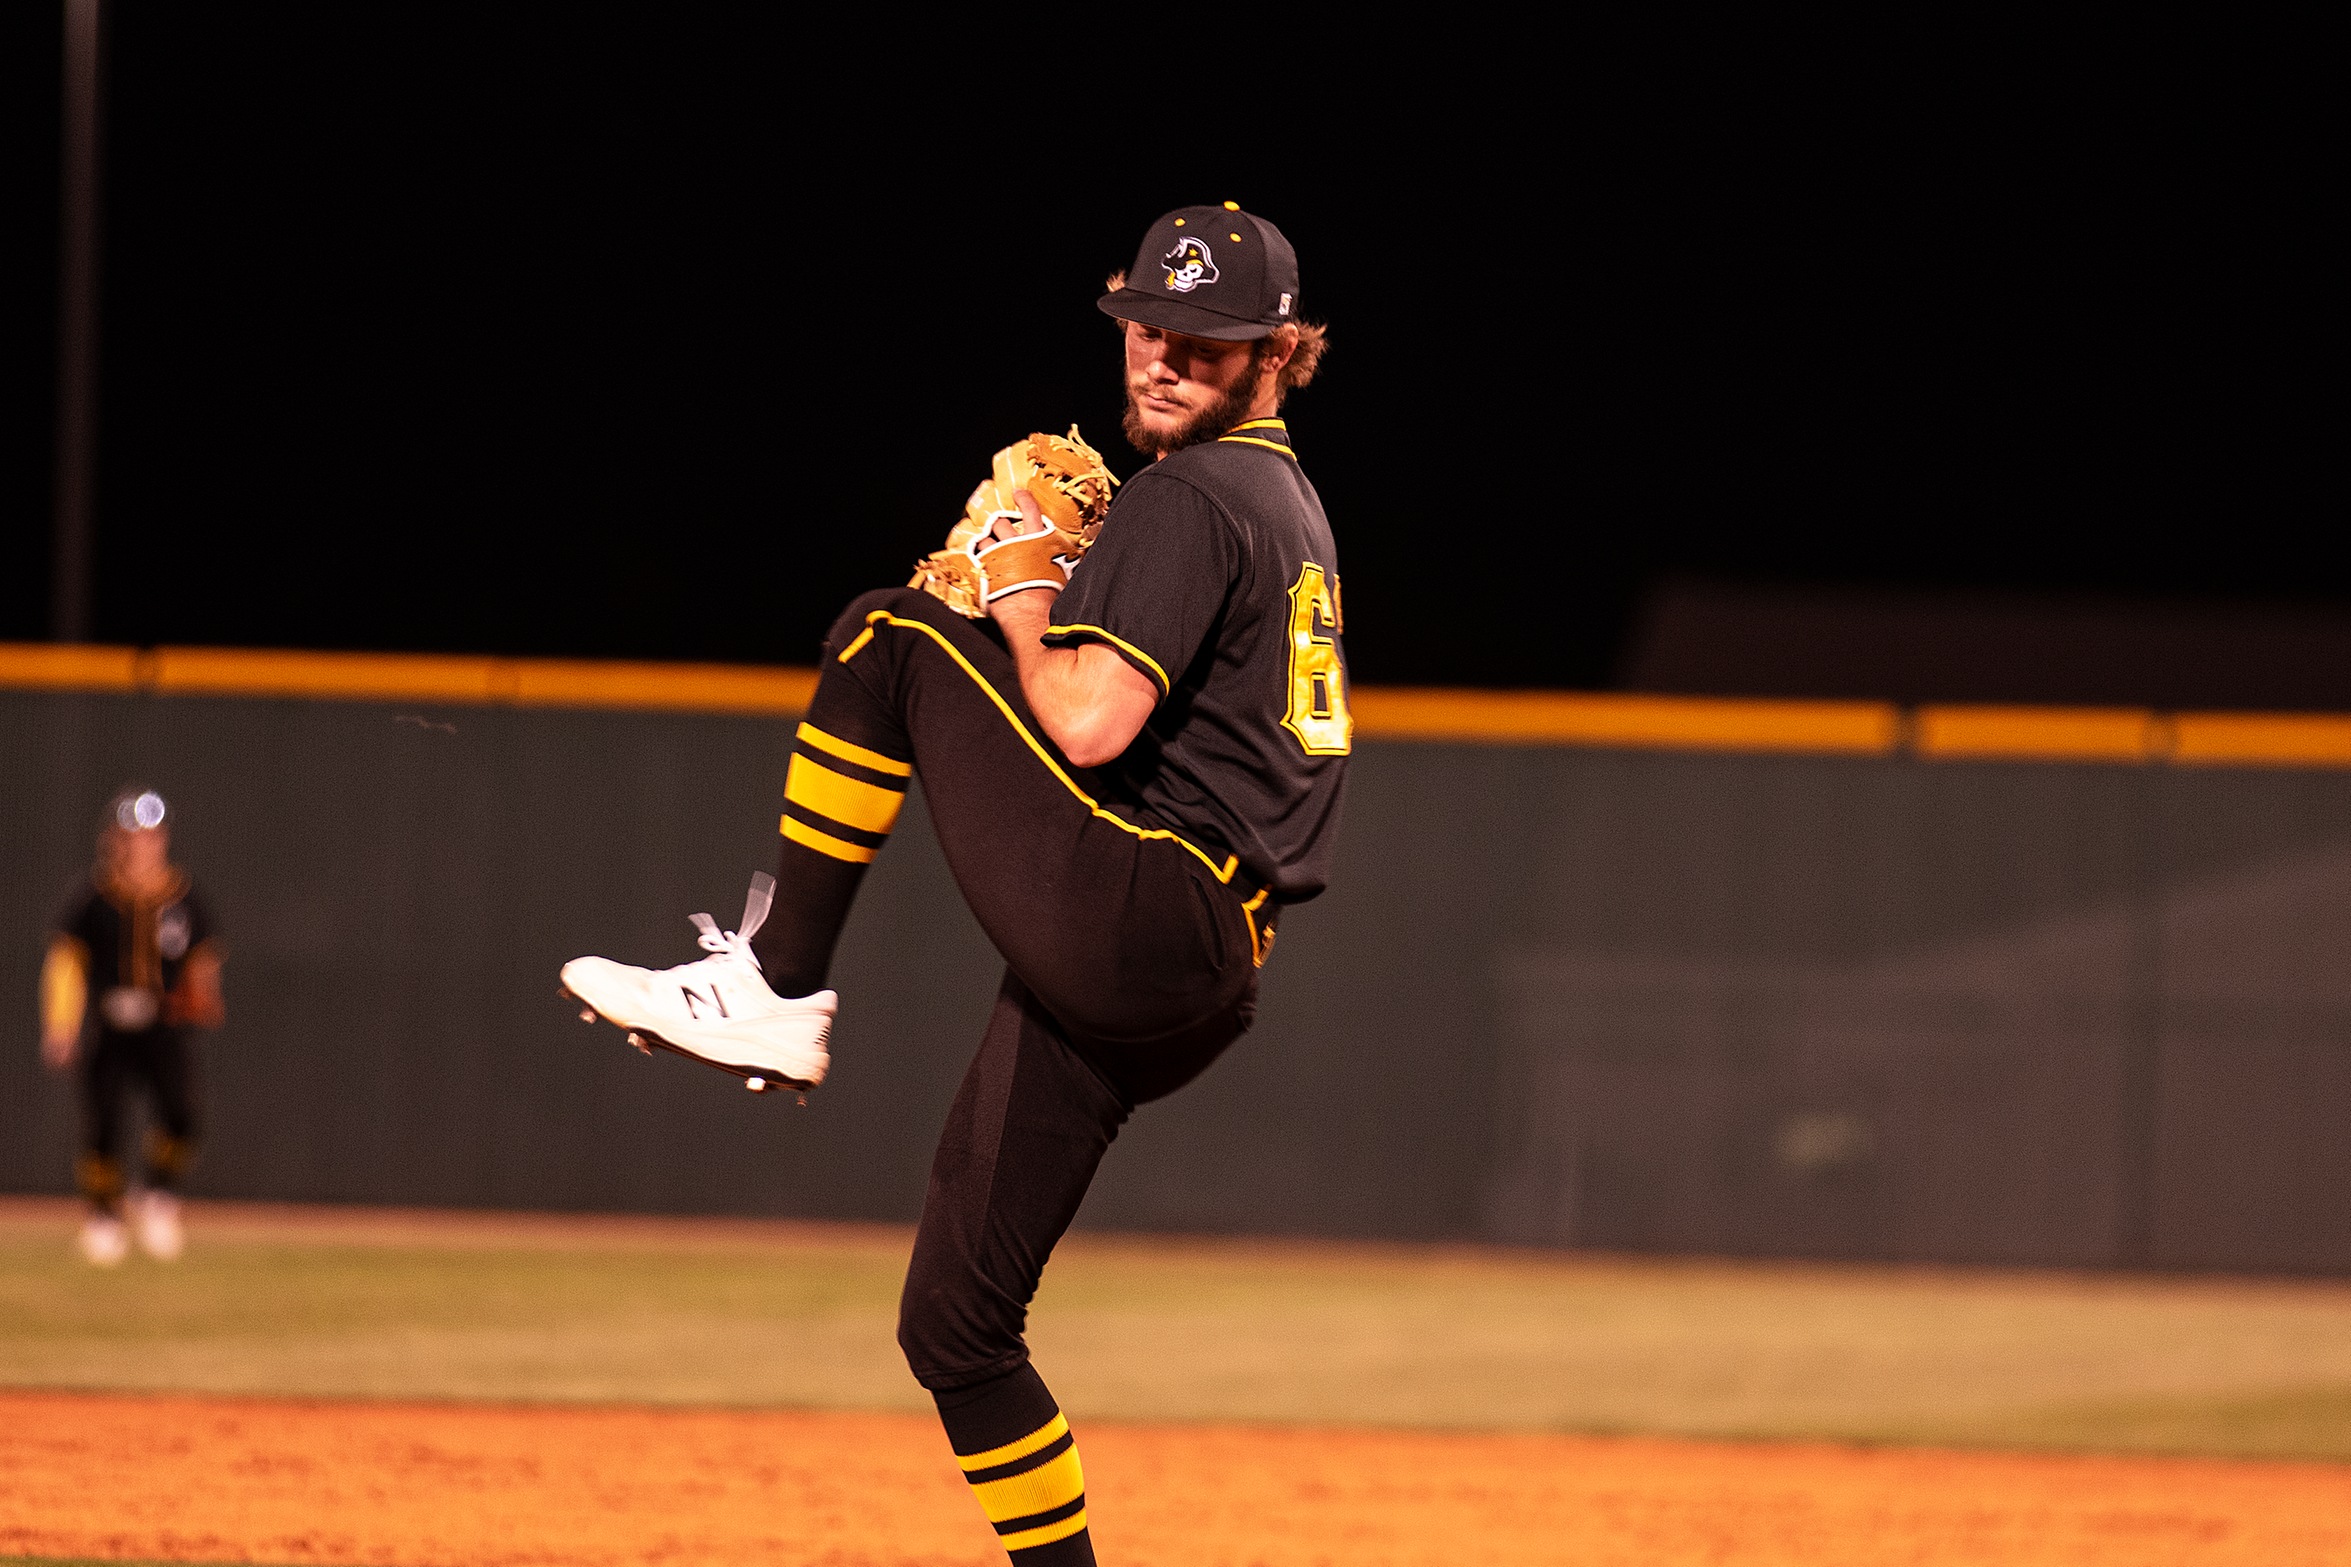 Second Inning Costs Baseball In Loss to McMurry